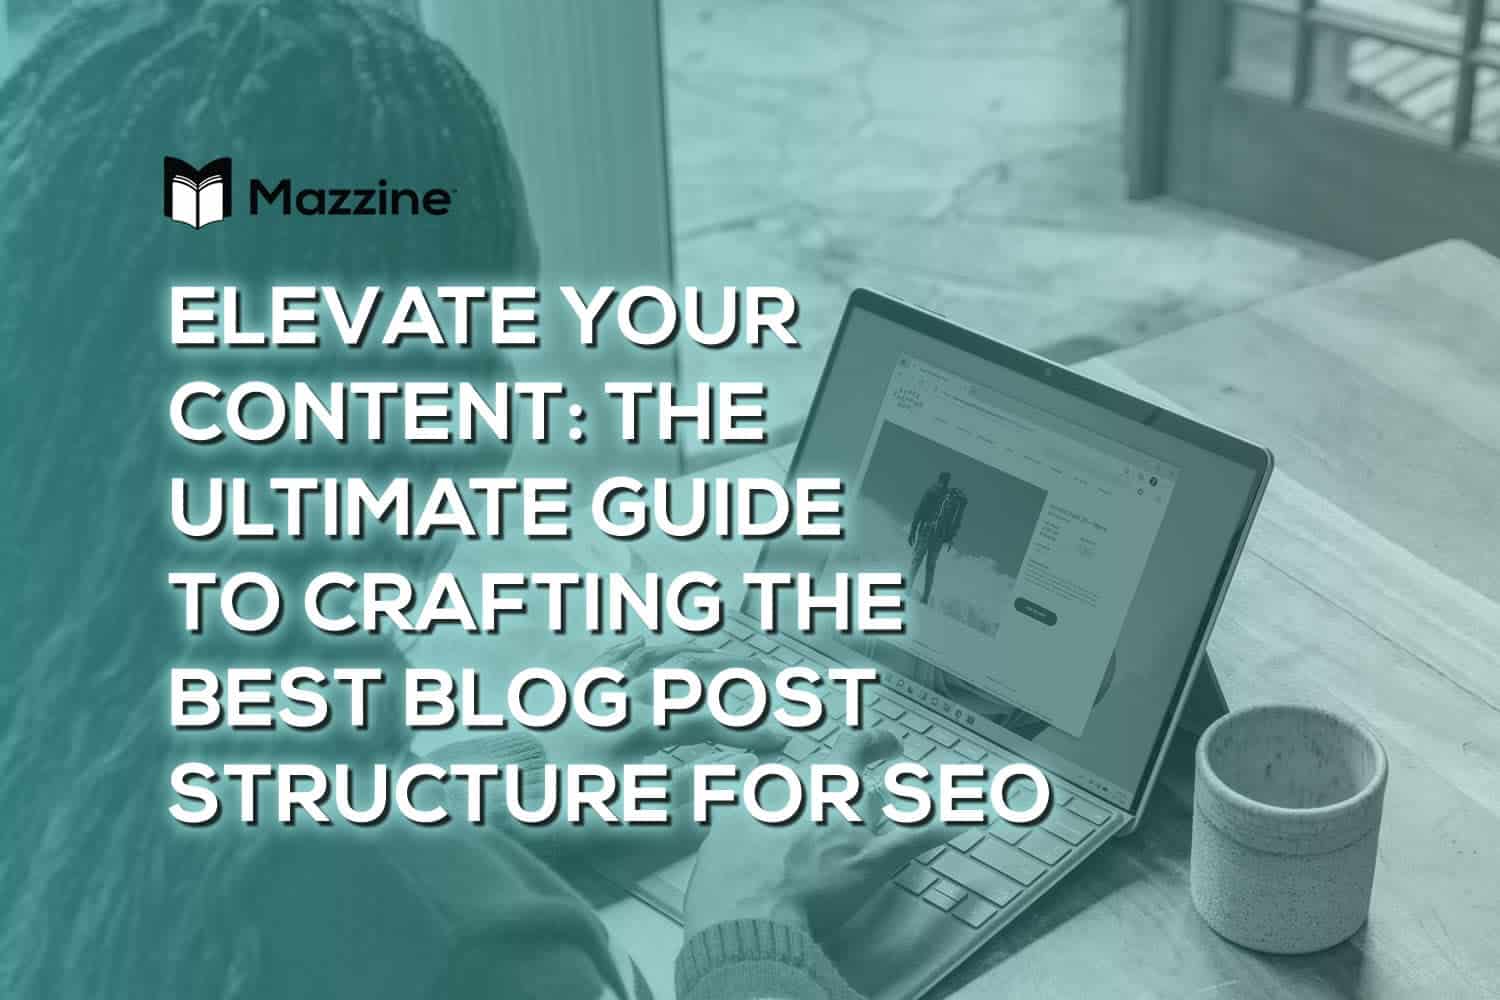 Elevate Your Content: The Ultimate Guide to Crafting the Best Blog Post Structure for SEO